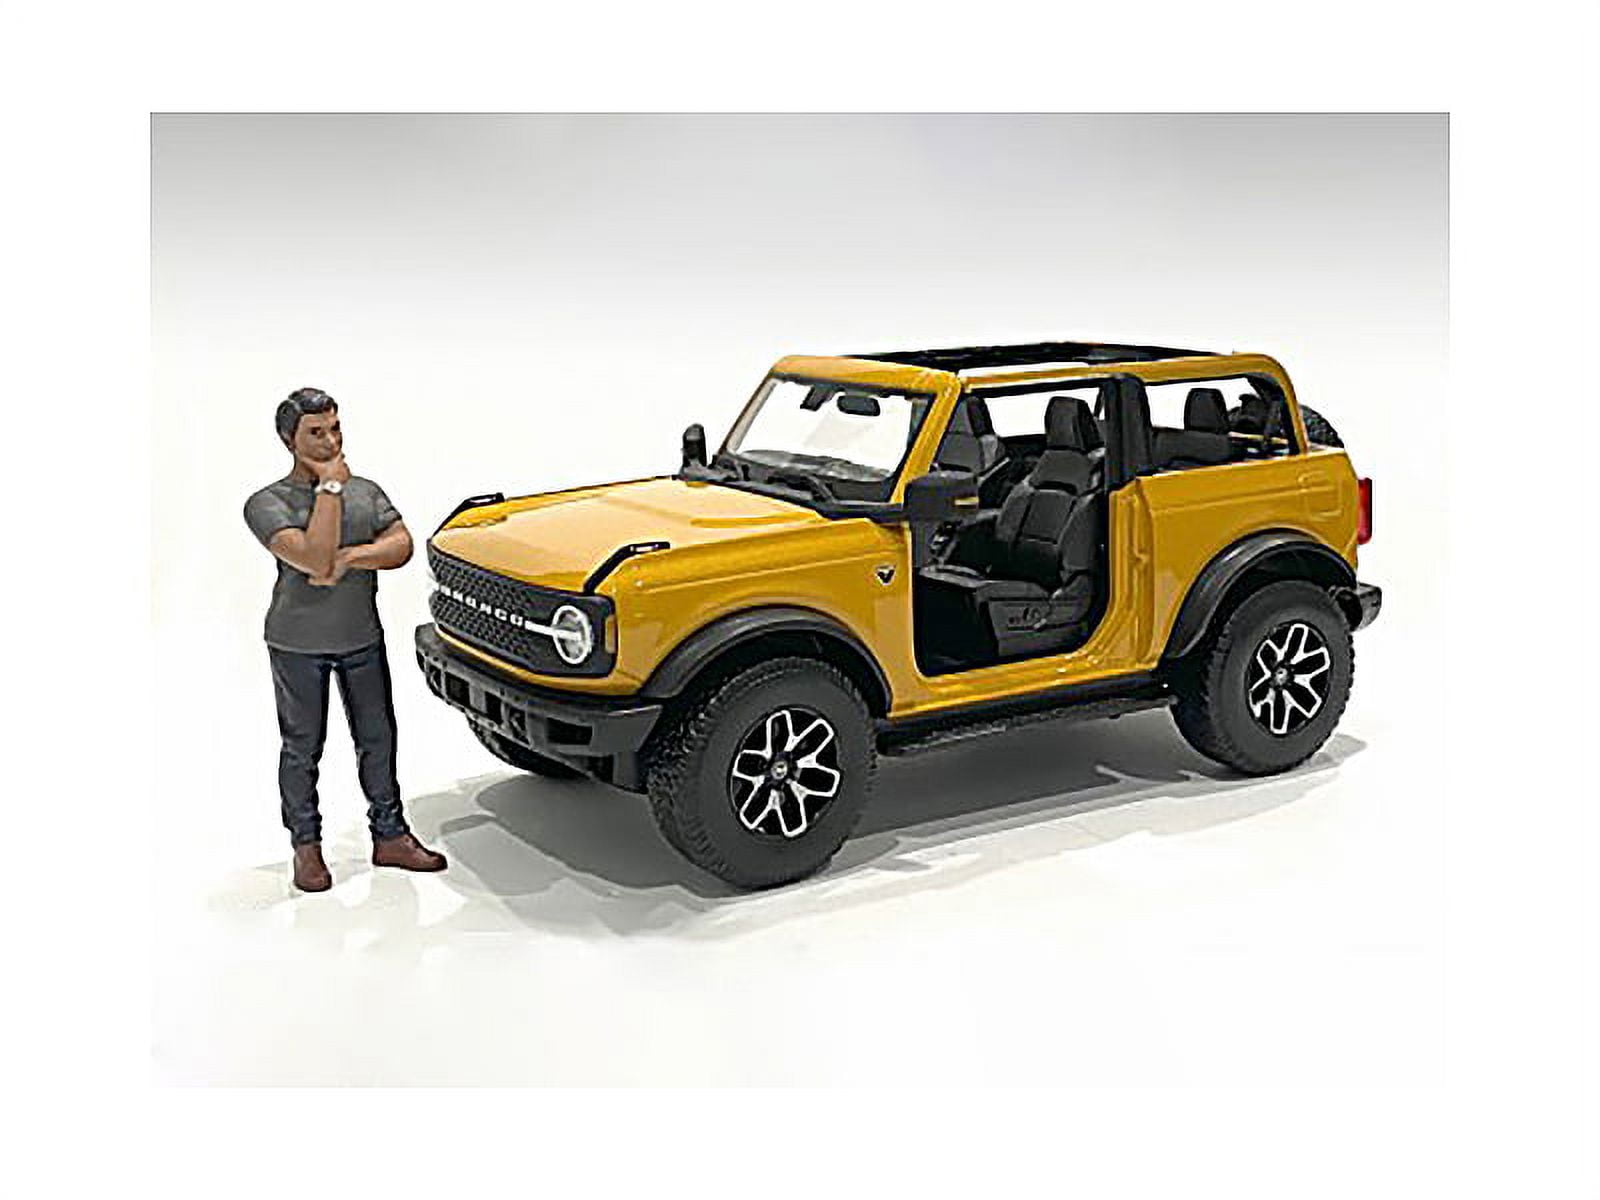 Picture of American Diorama AD76411 1-24 Scale The Dealership Customer III Figurine for Model